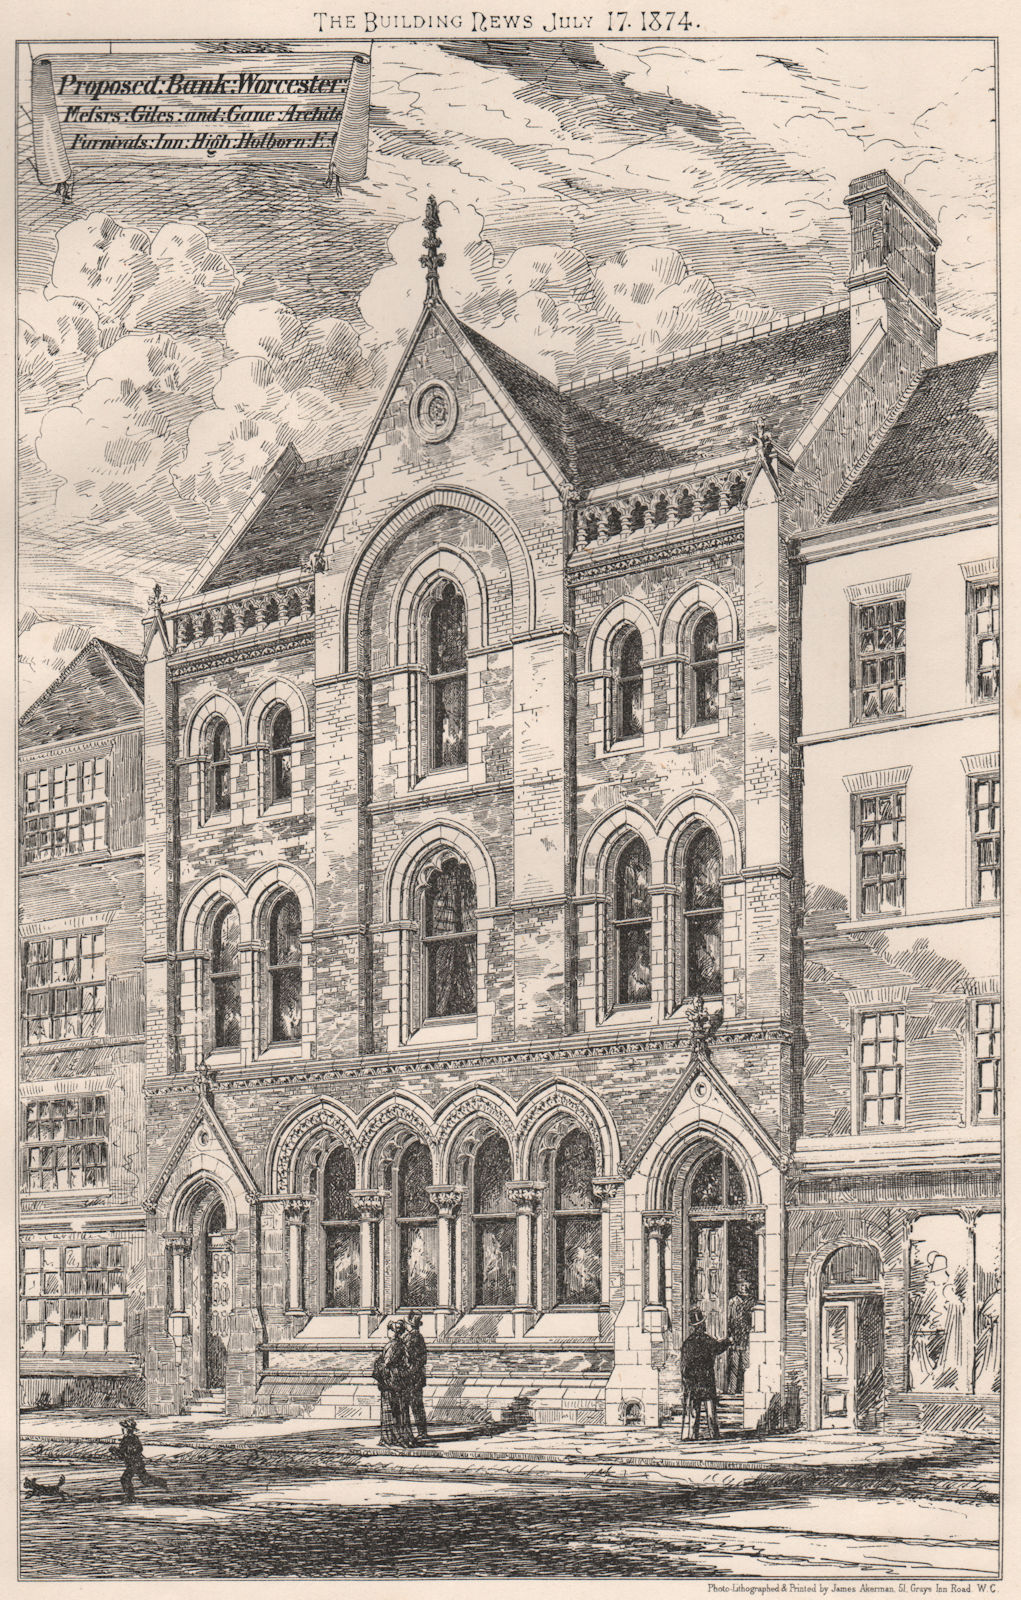 Associate Product Proposed bank, Worcester; Giles & Gane Architect. Worcestershire 1874 print